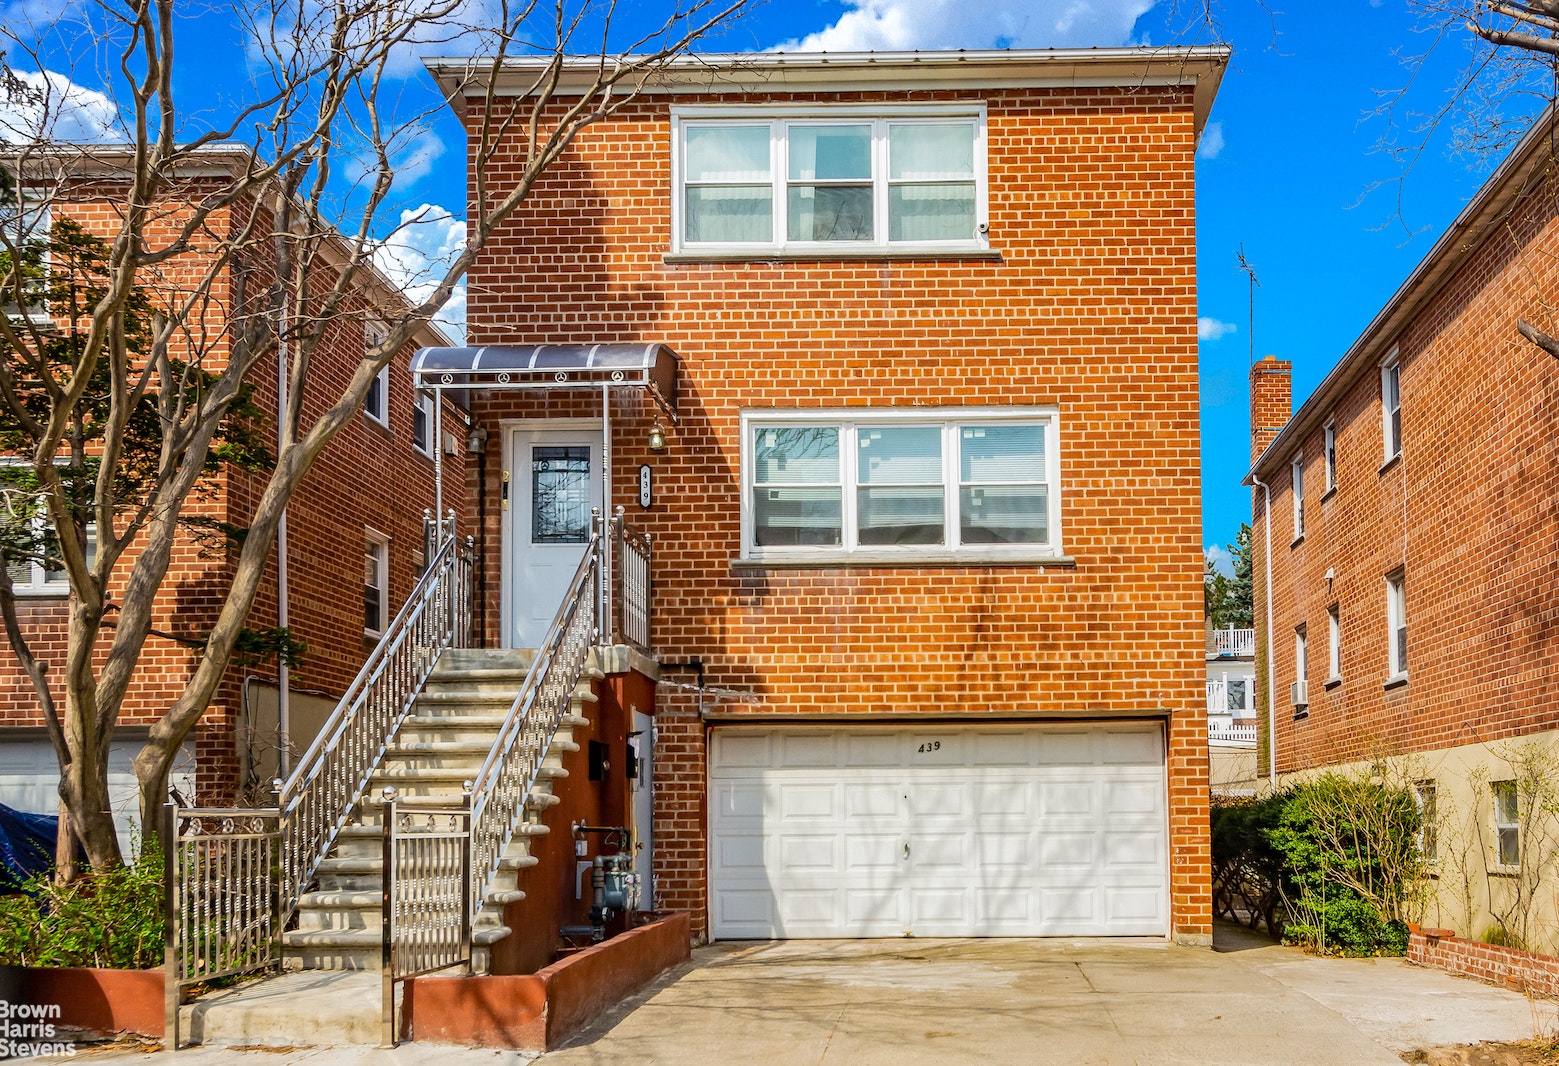 439 West 263rd Street 1, North Riverdale, Bronx, New York - 3 Bedrooms  
1.5 Bathrooms  
5 Rooms - 